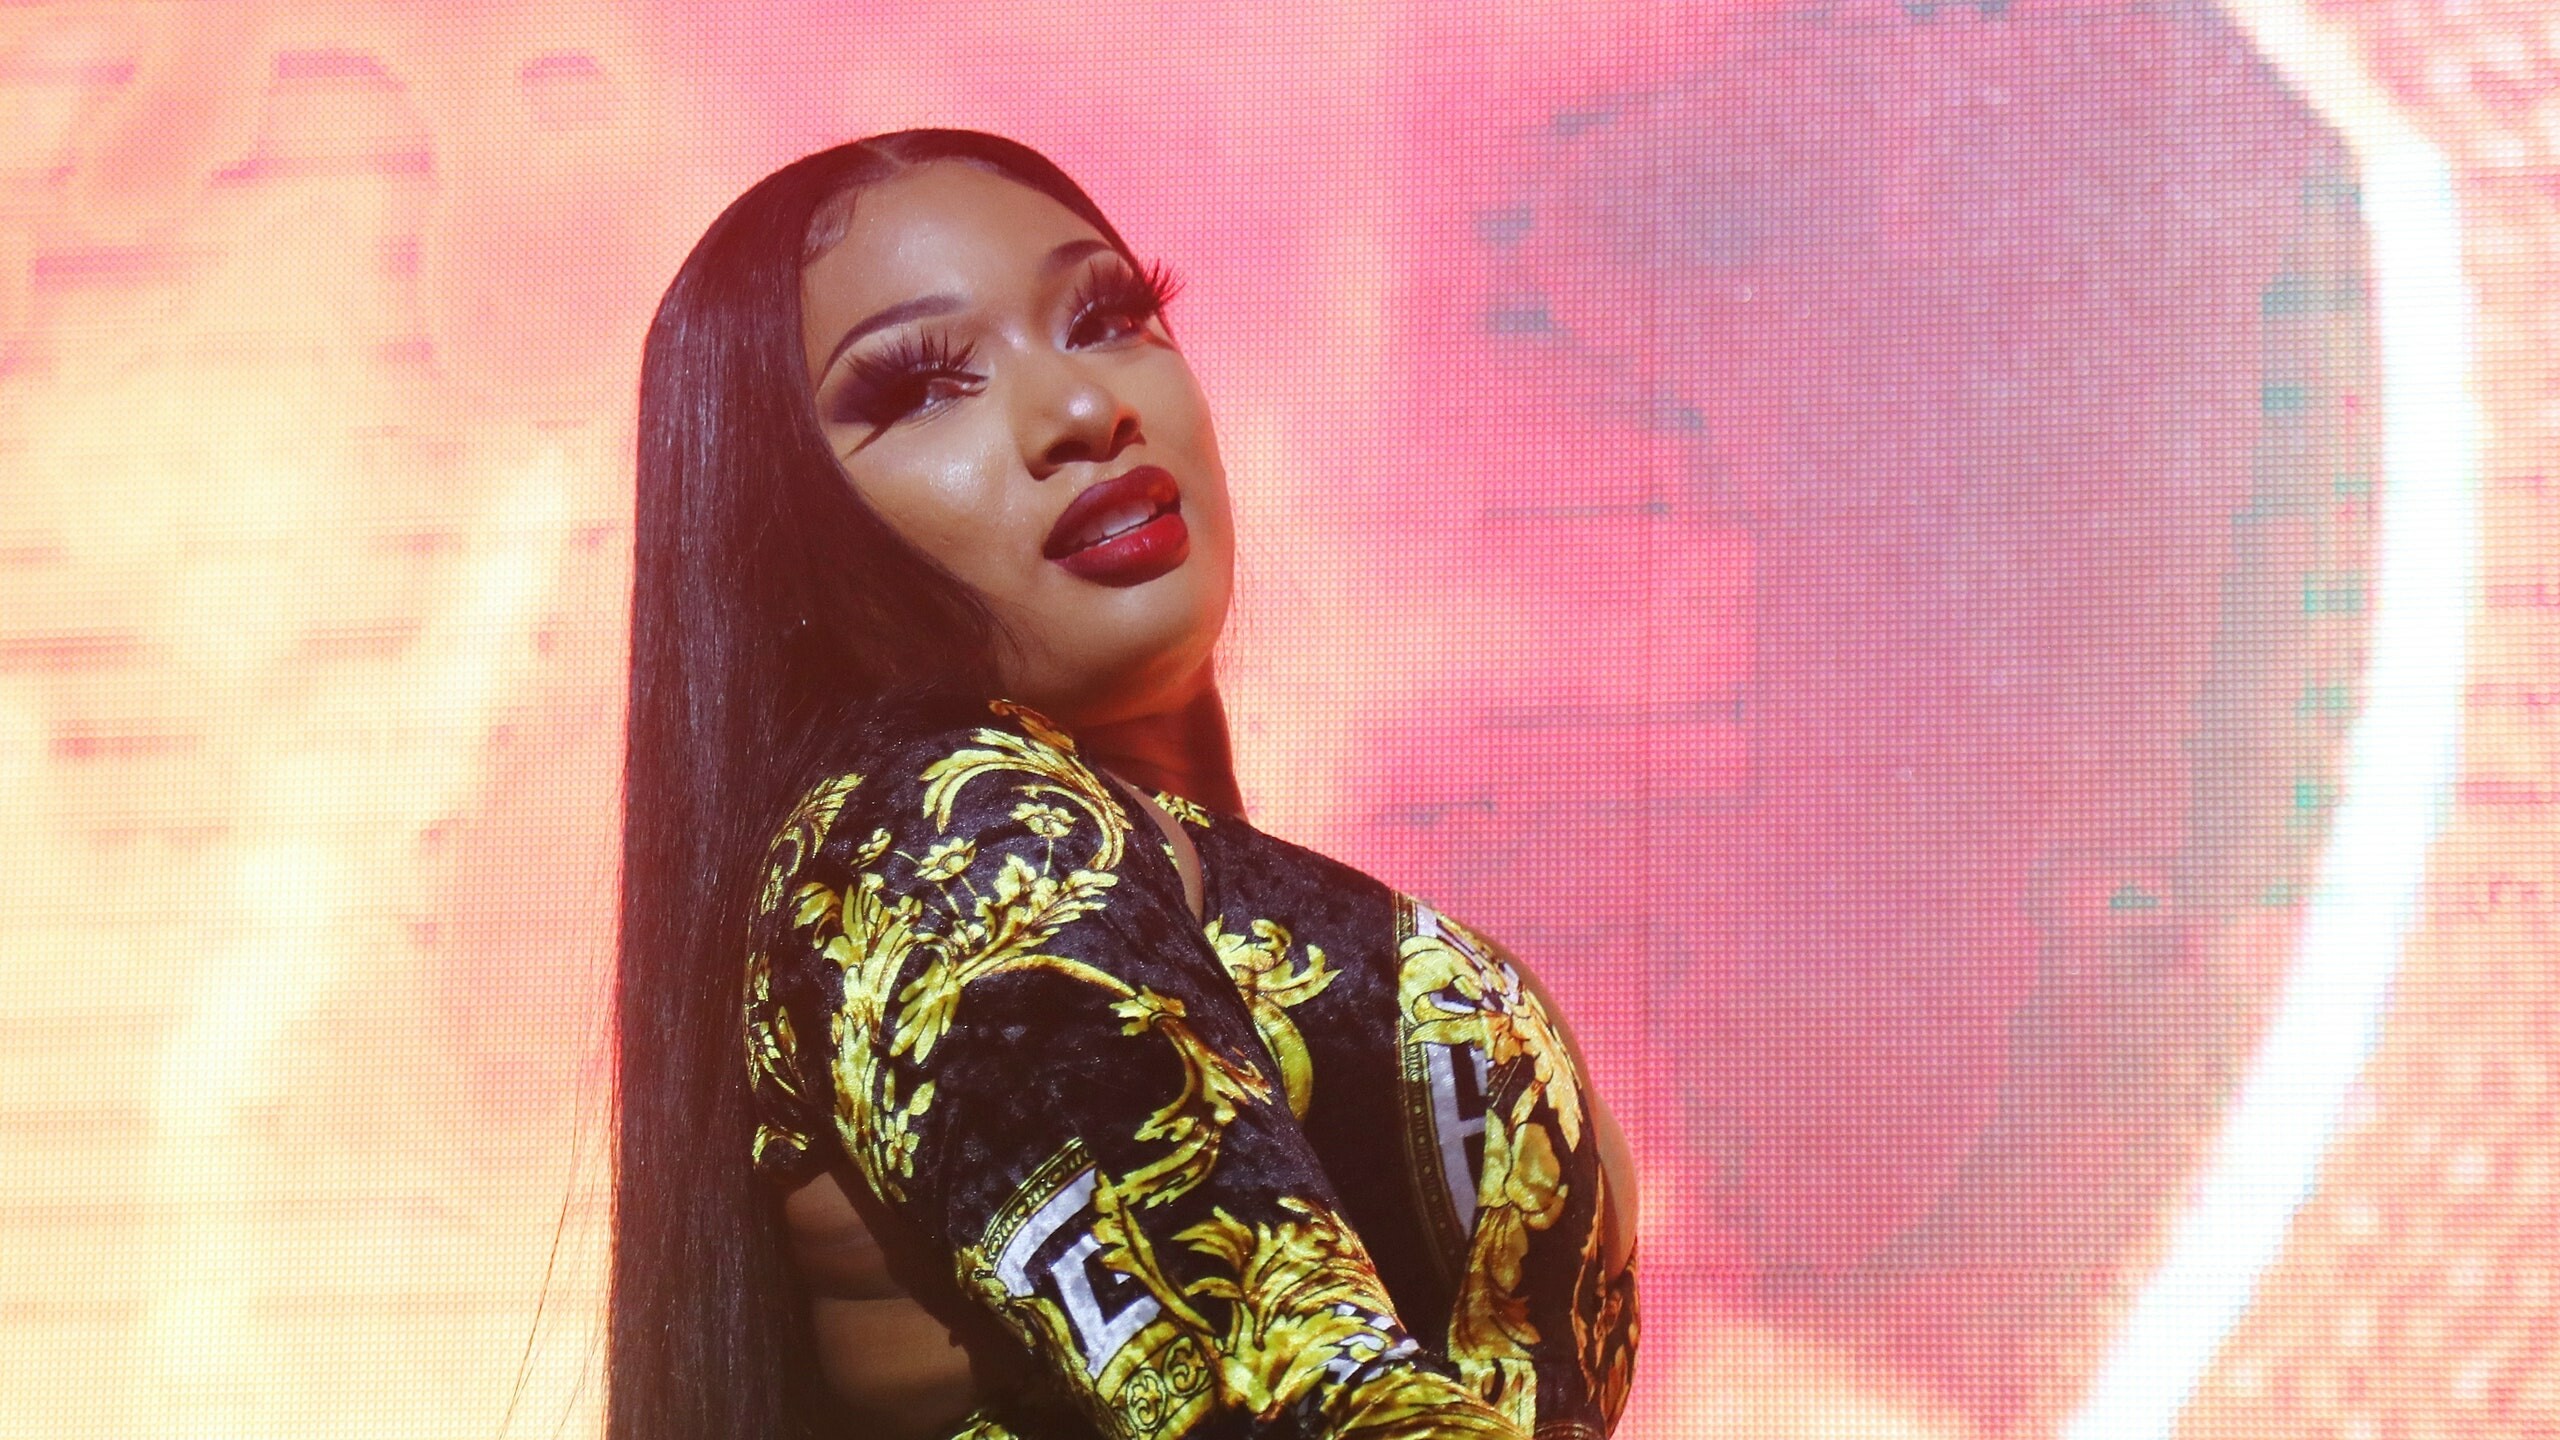 Megan Thee Stallion: The Suga's second single, "Captain Hook", was released on March 10, 2020. 2560x1440 HD Wallpaper.